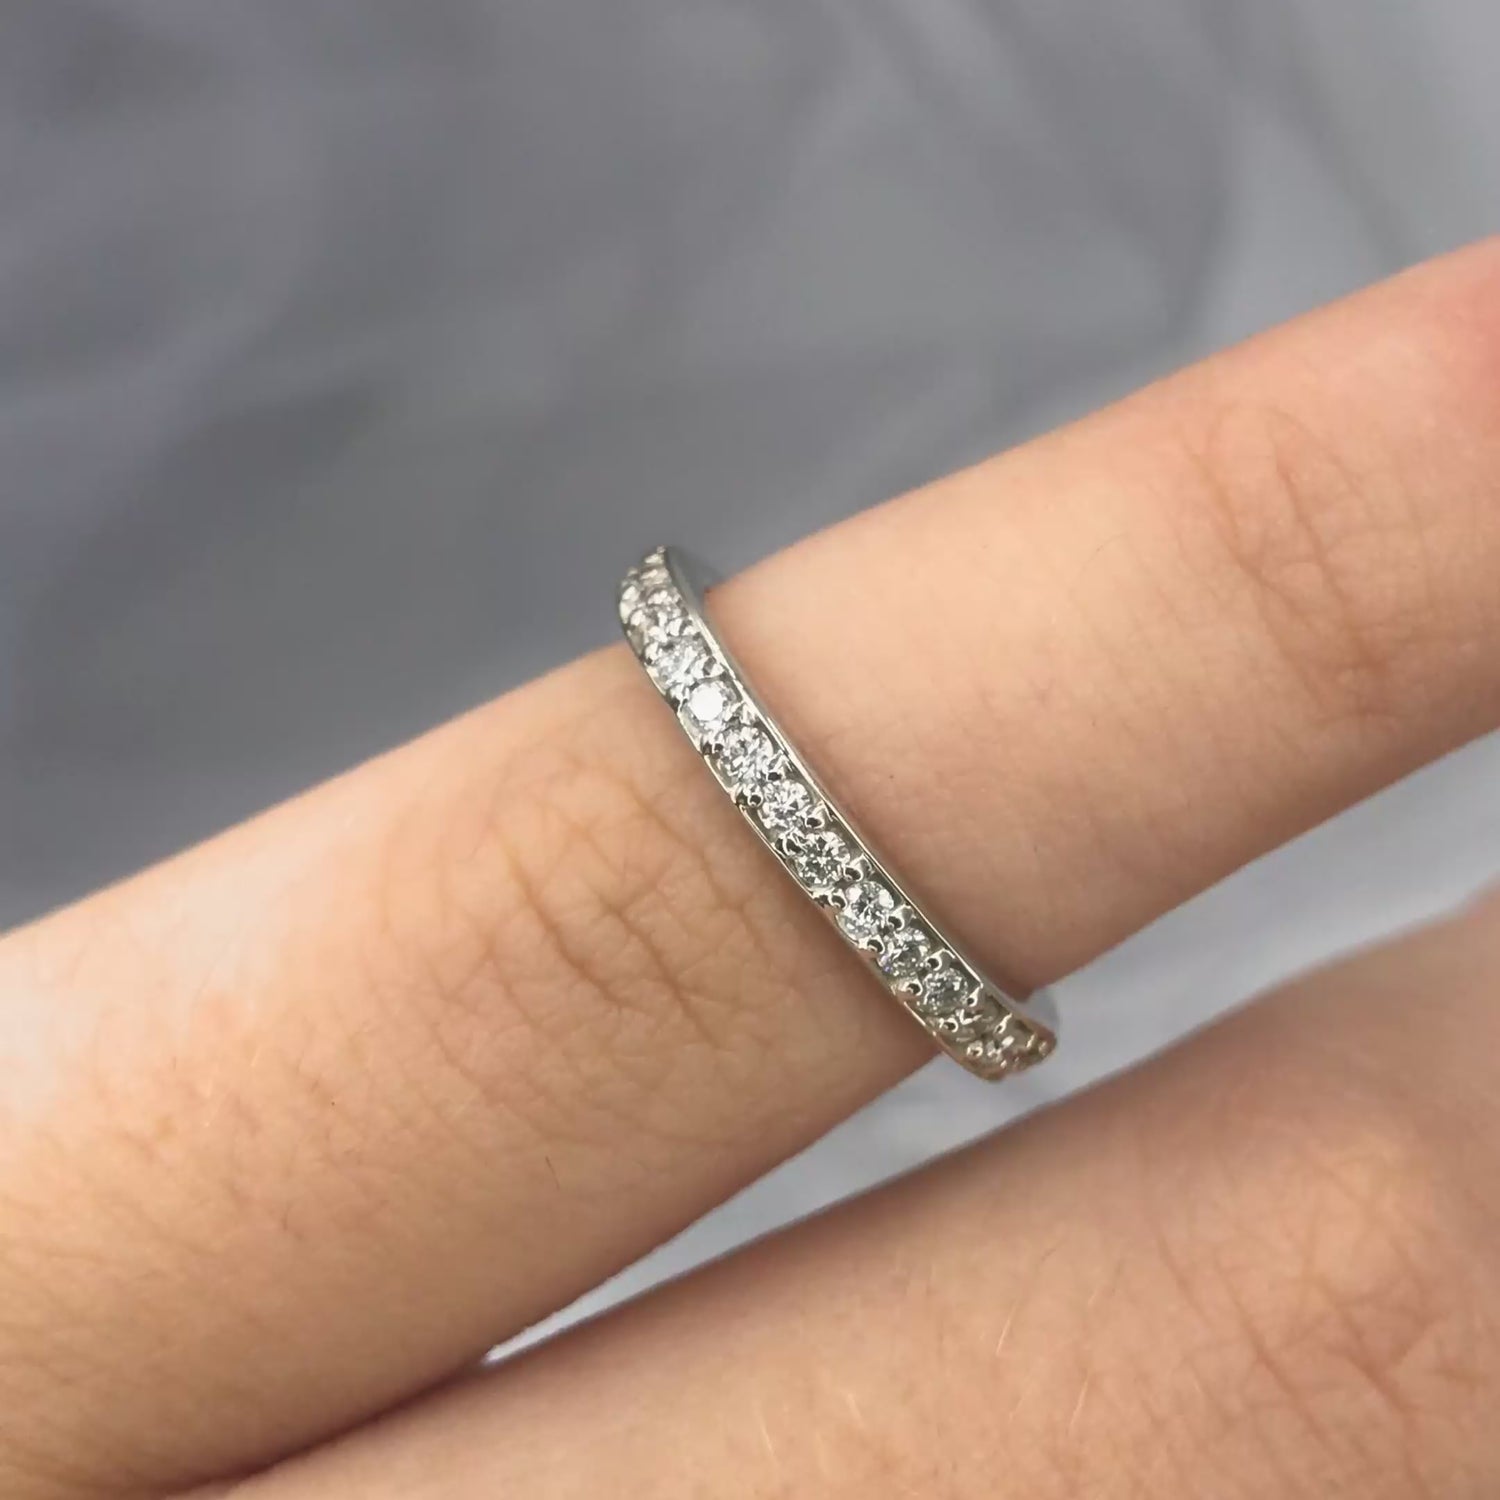 Exclusive 0.50 CT Round Cut Diamond Eternity Ring in 14KT White Gold